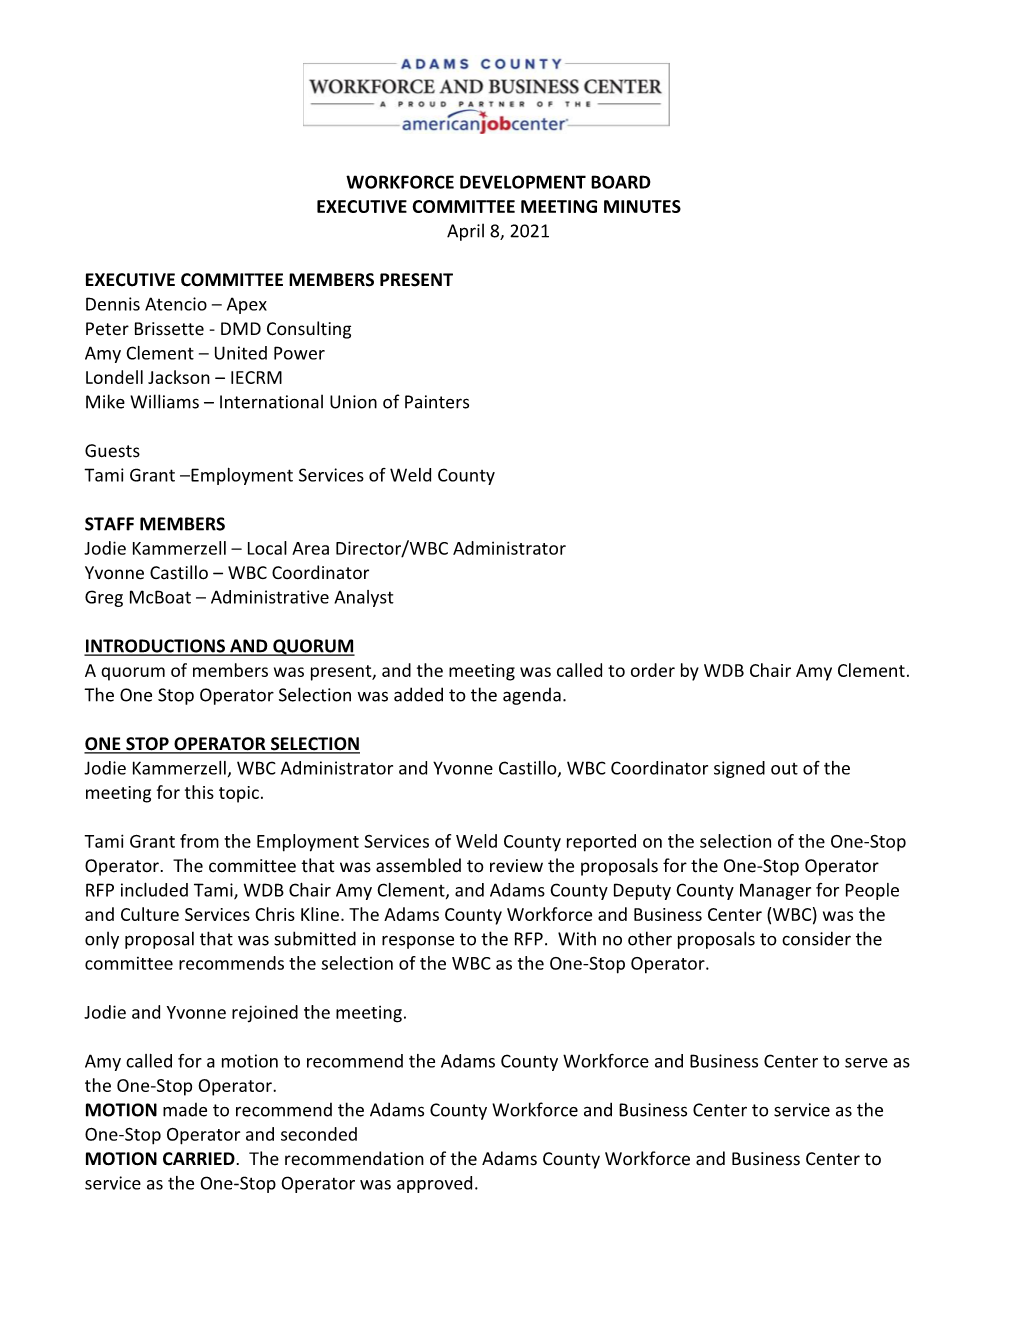 WORKFORCE DEVELOPMENT BOARD EXECUTIVE COMMITTEE MEETING MINUTES April 8, 2021